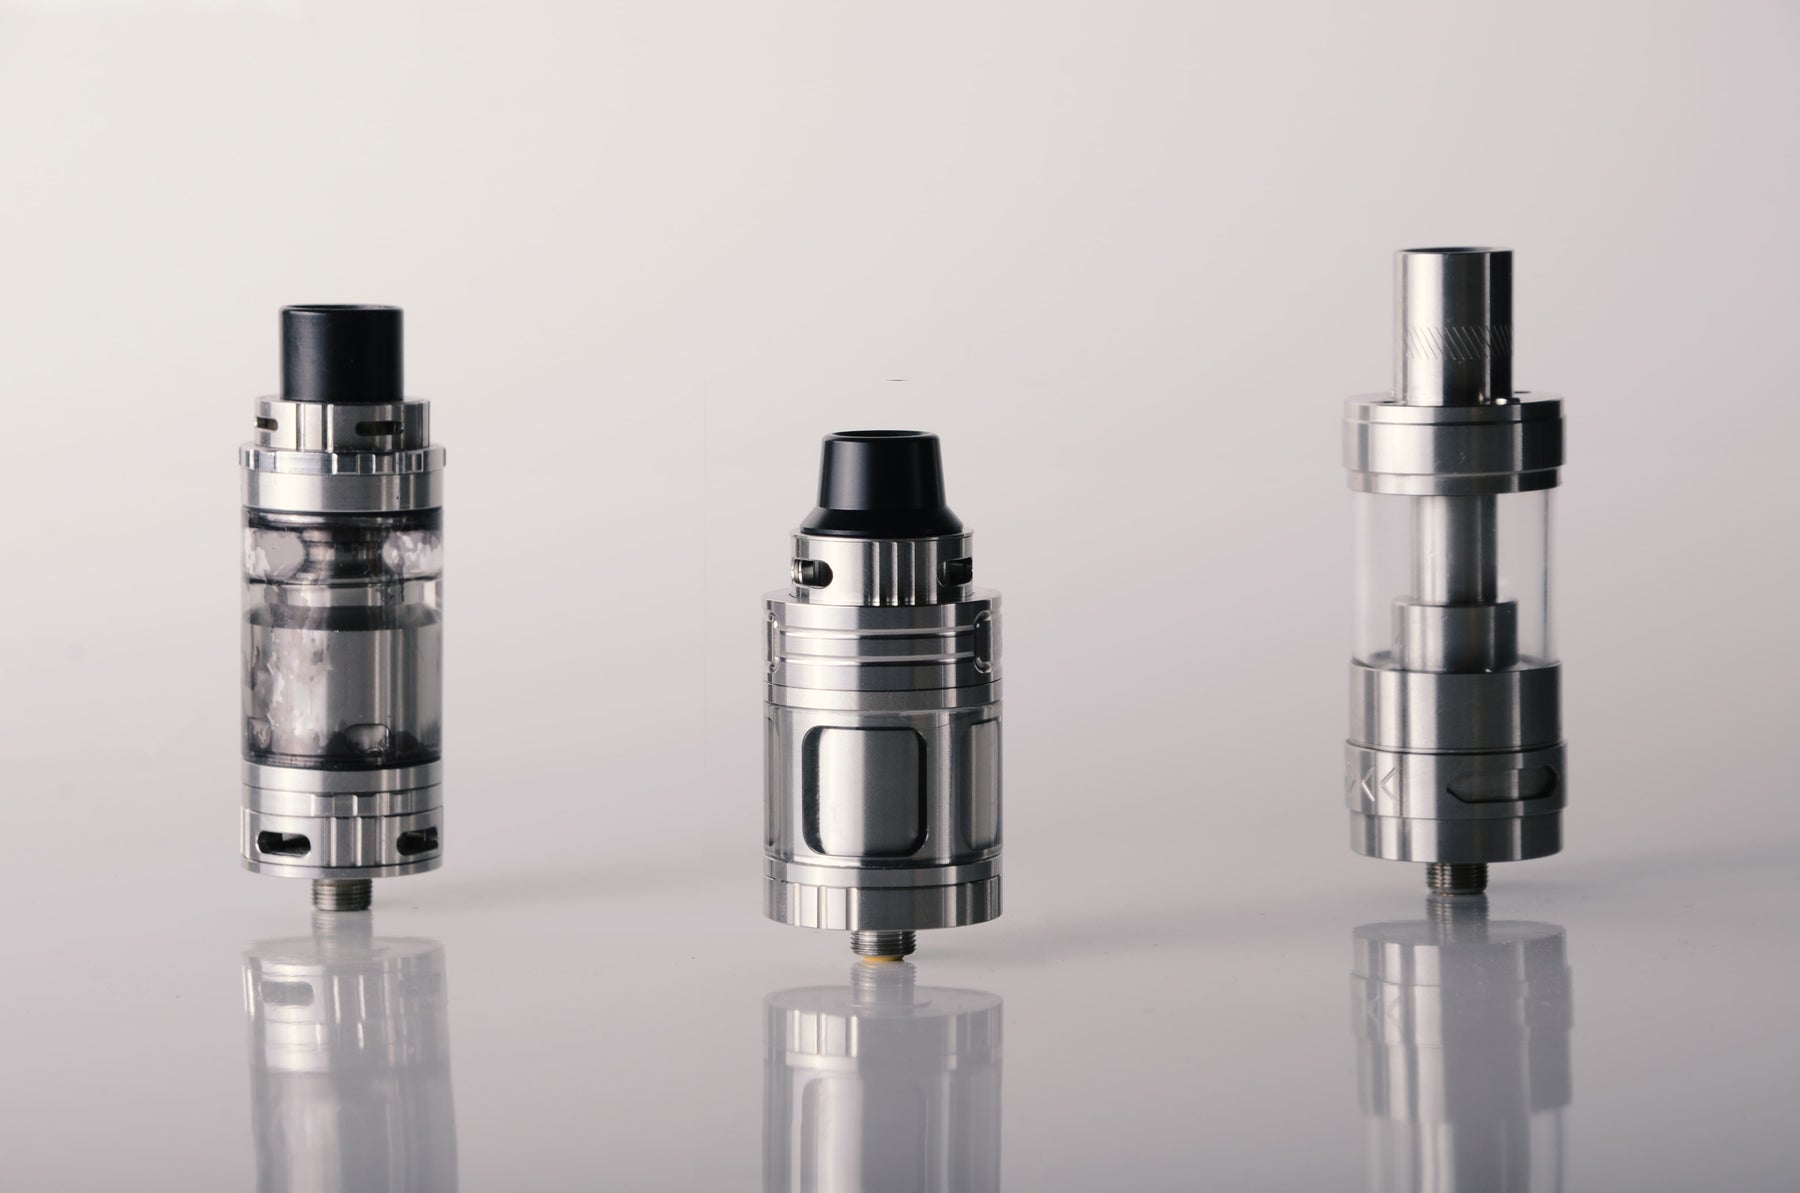 What is the Best Vape Tank For Flavor in 2019?